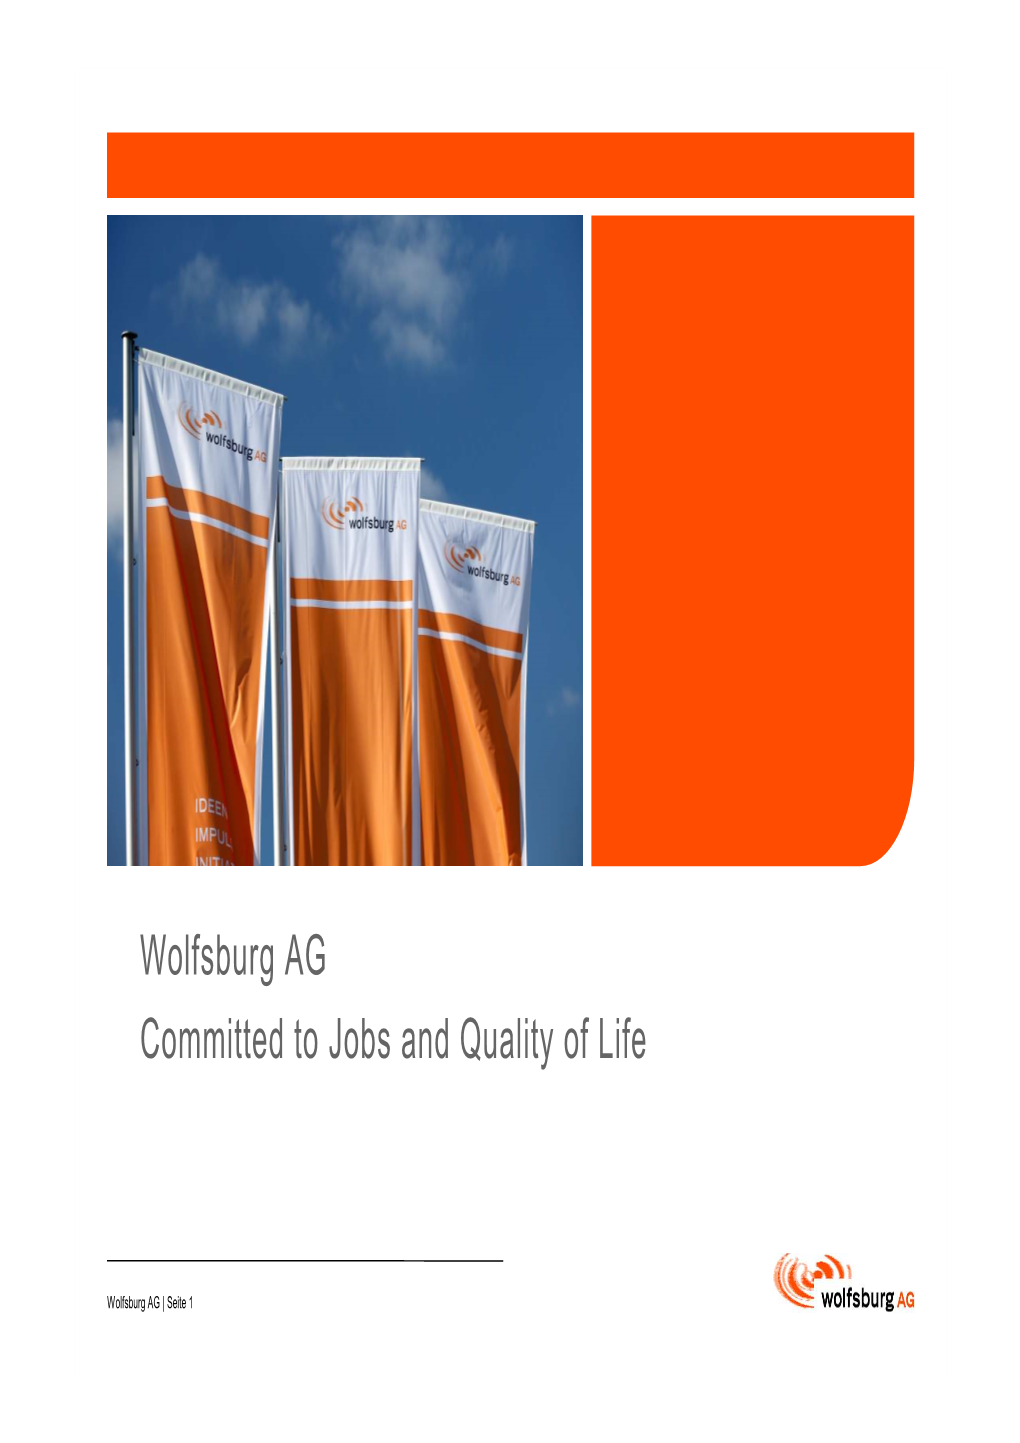 Wolfsburg AG Committed to Jobs and Quality of Life